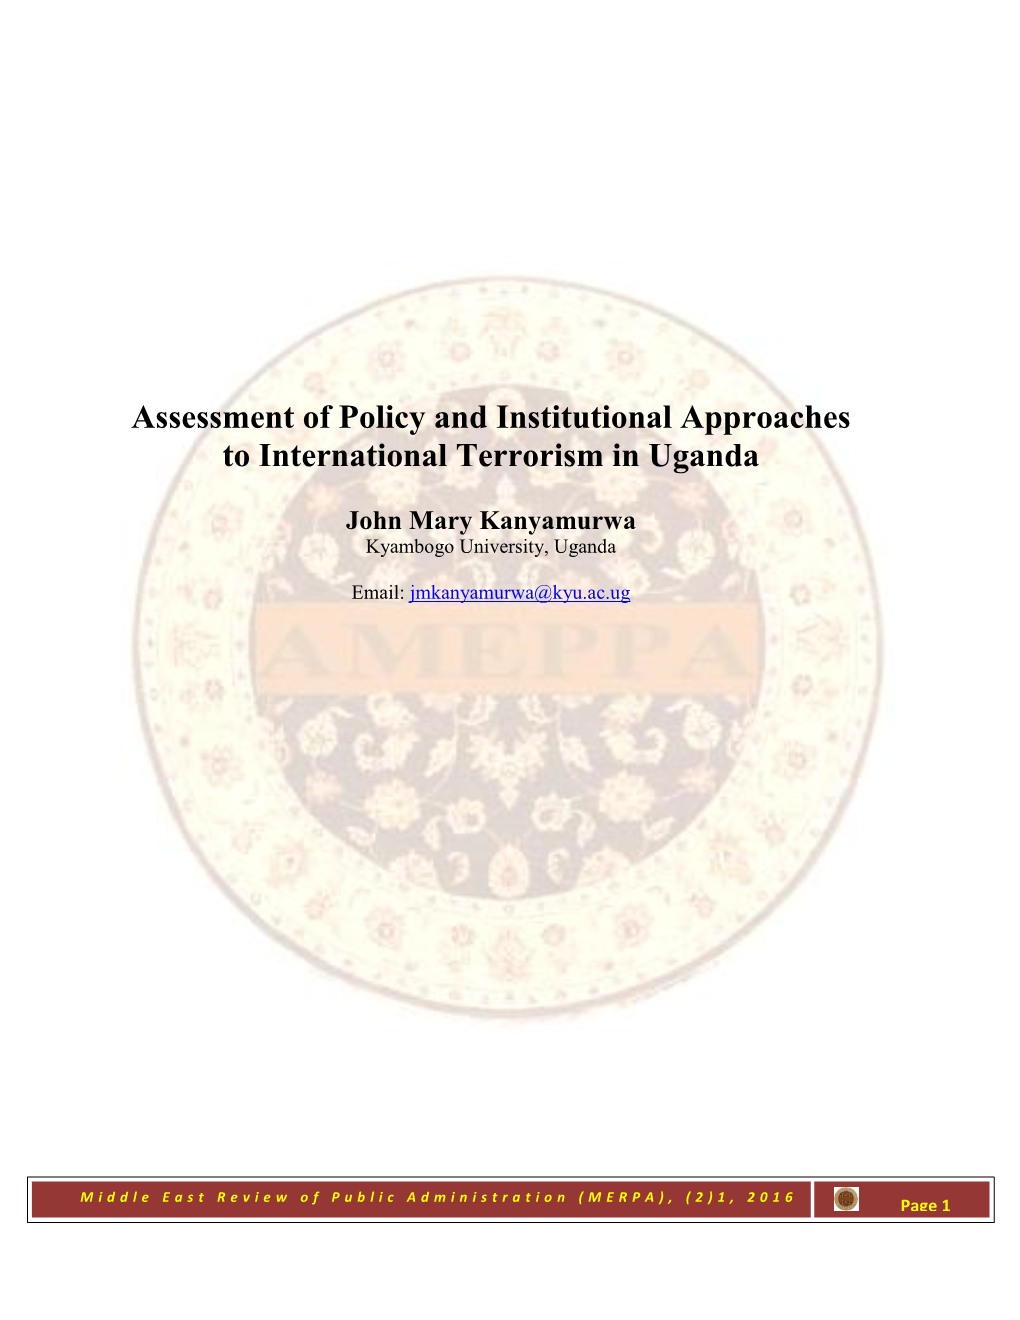 Assessment of Policy and Institutional Approaches to International Terrorism in Uganda